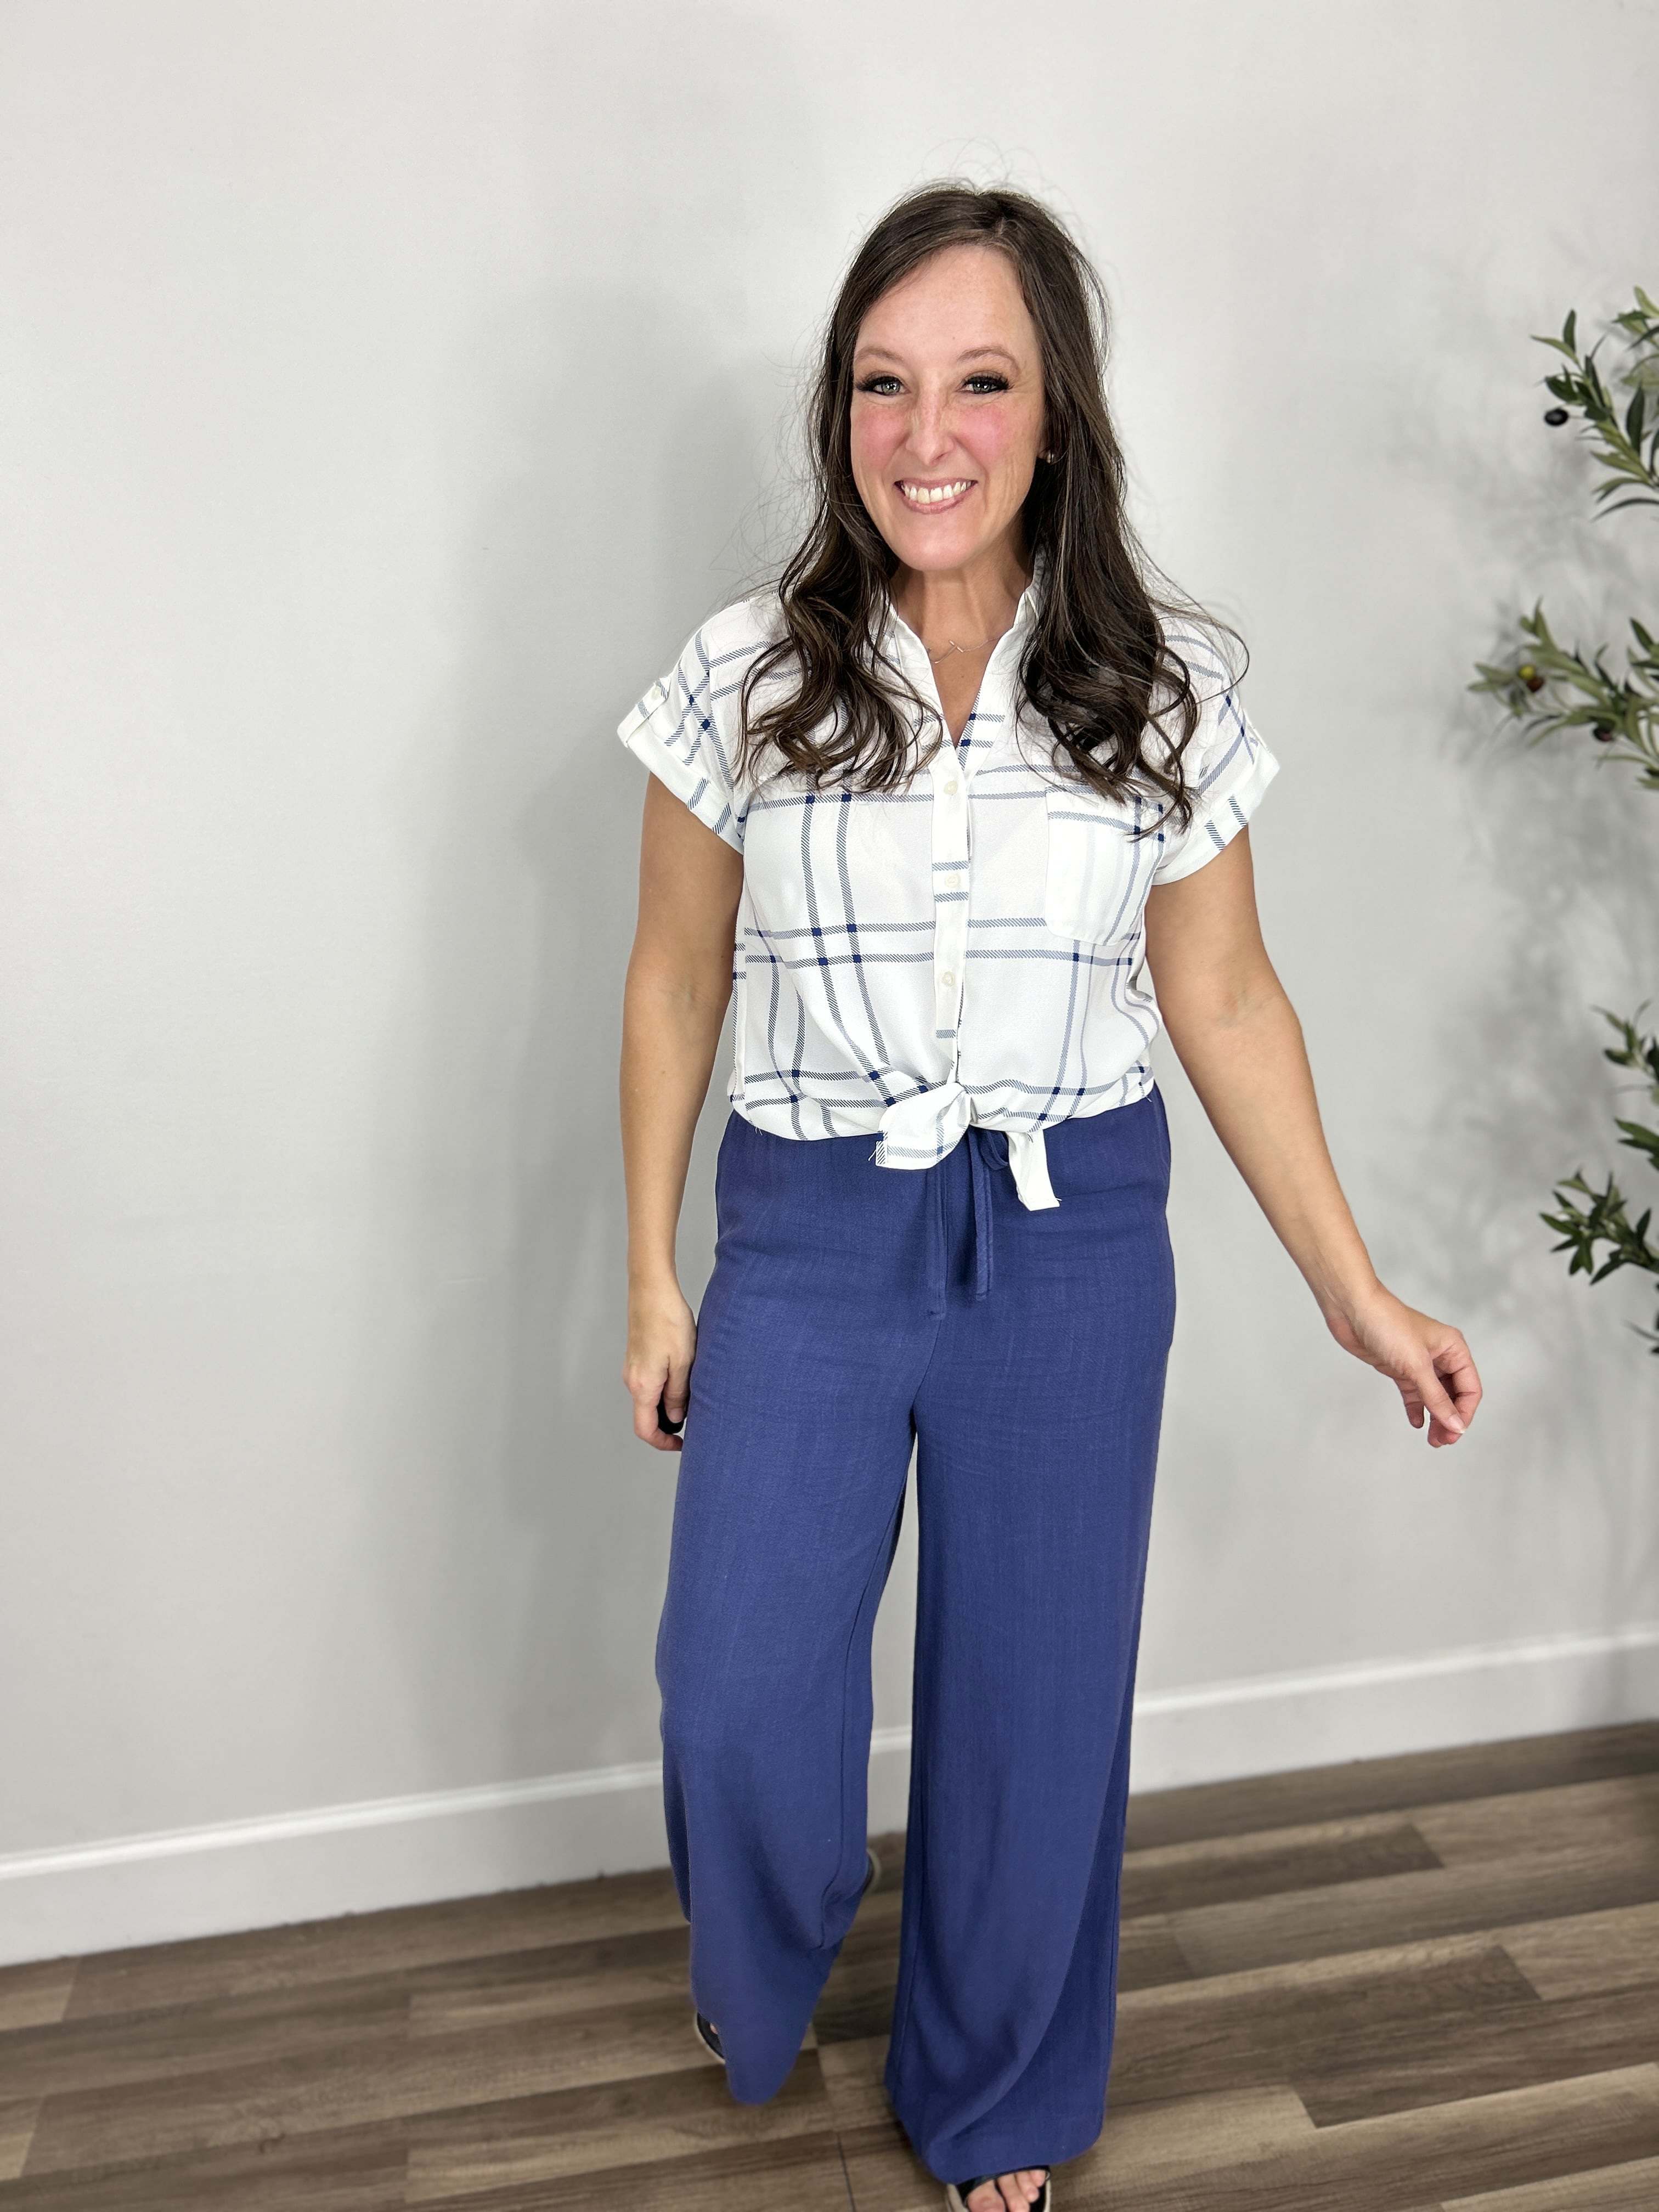 Tate linen blend blue wide leg pant styled with the blue and white button down top.